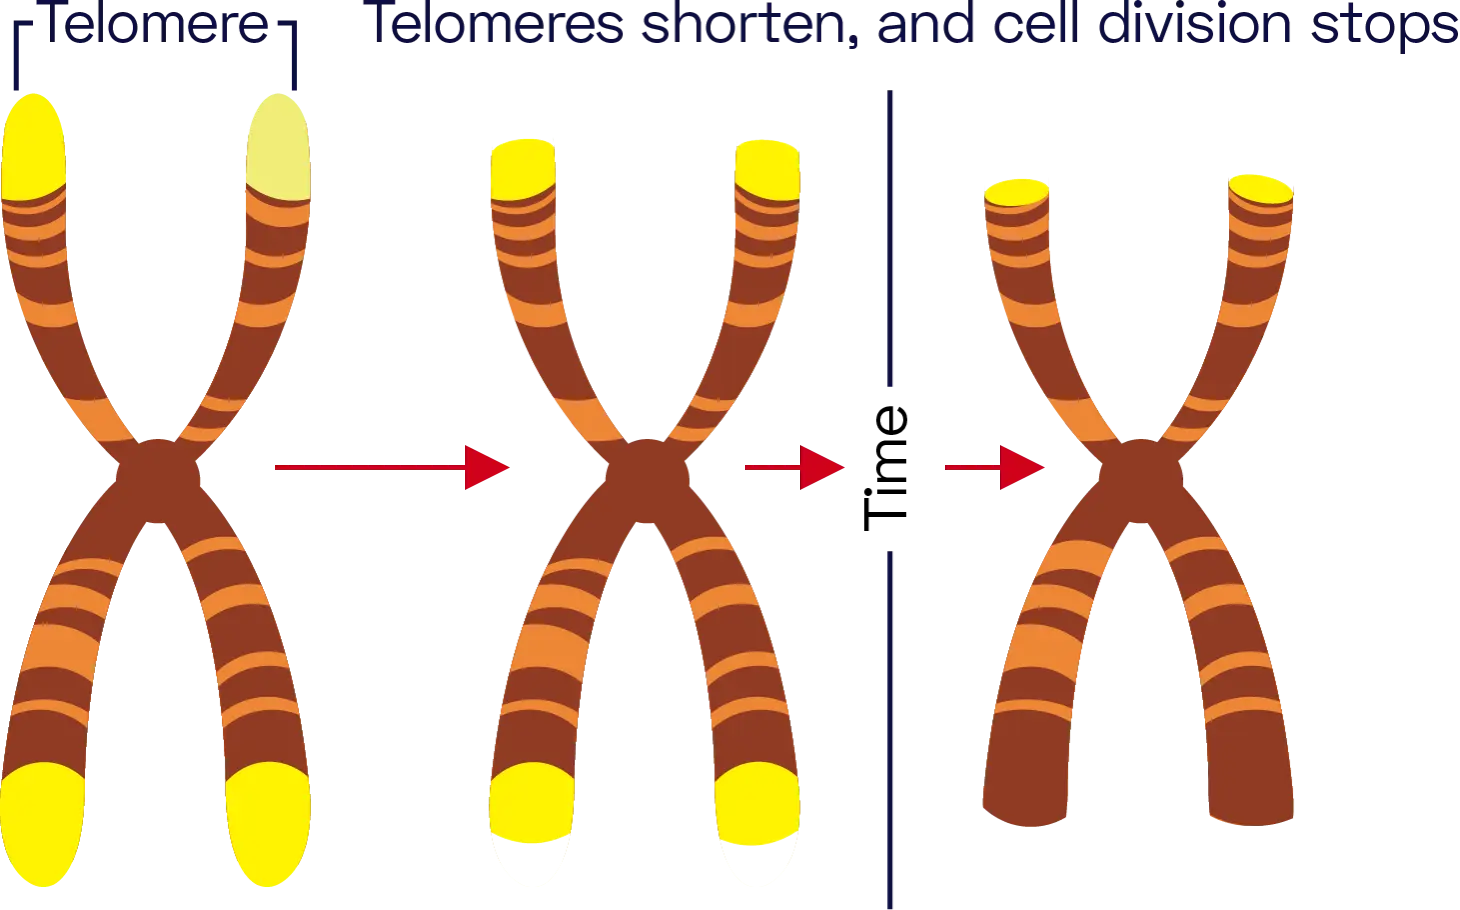 The telomeres shorten as we age, but telomere lenght is also influenced by genetics.